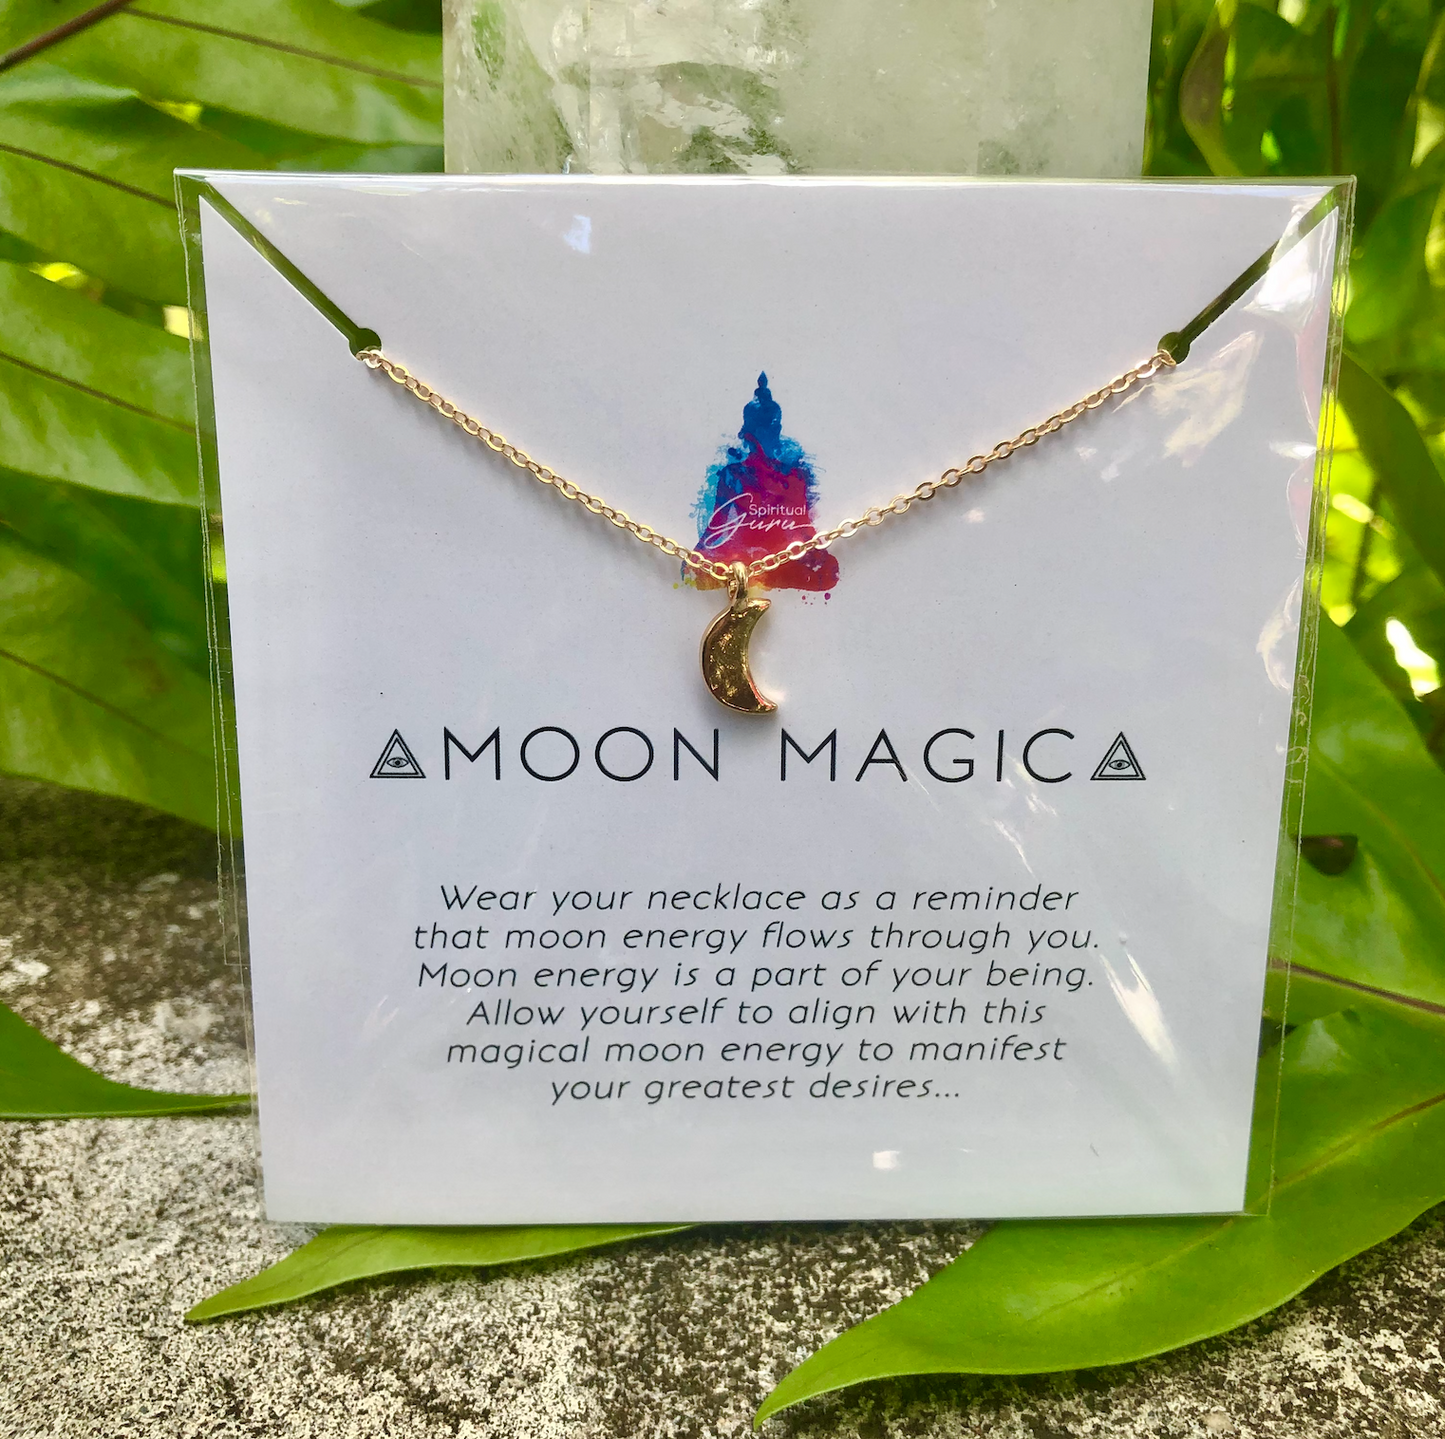 "Moon Magic" Affirmation Necklace